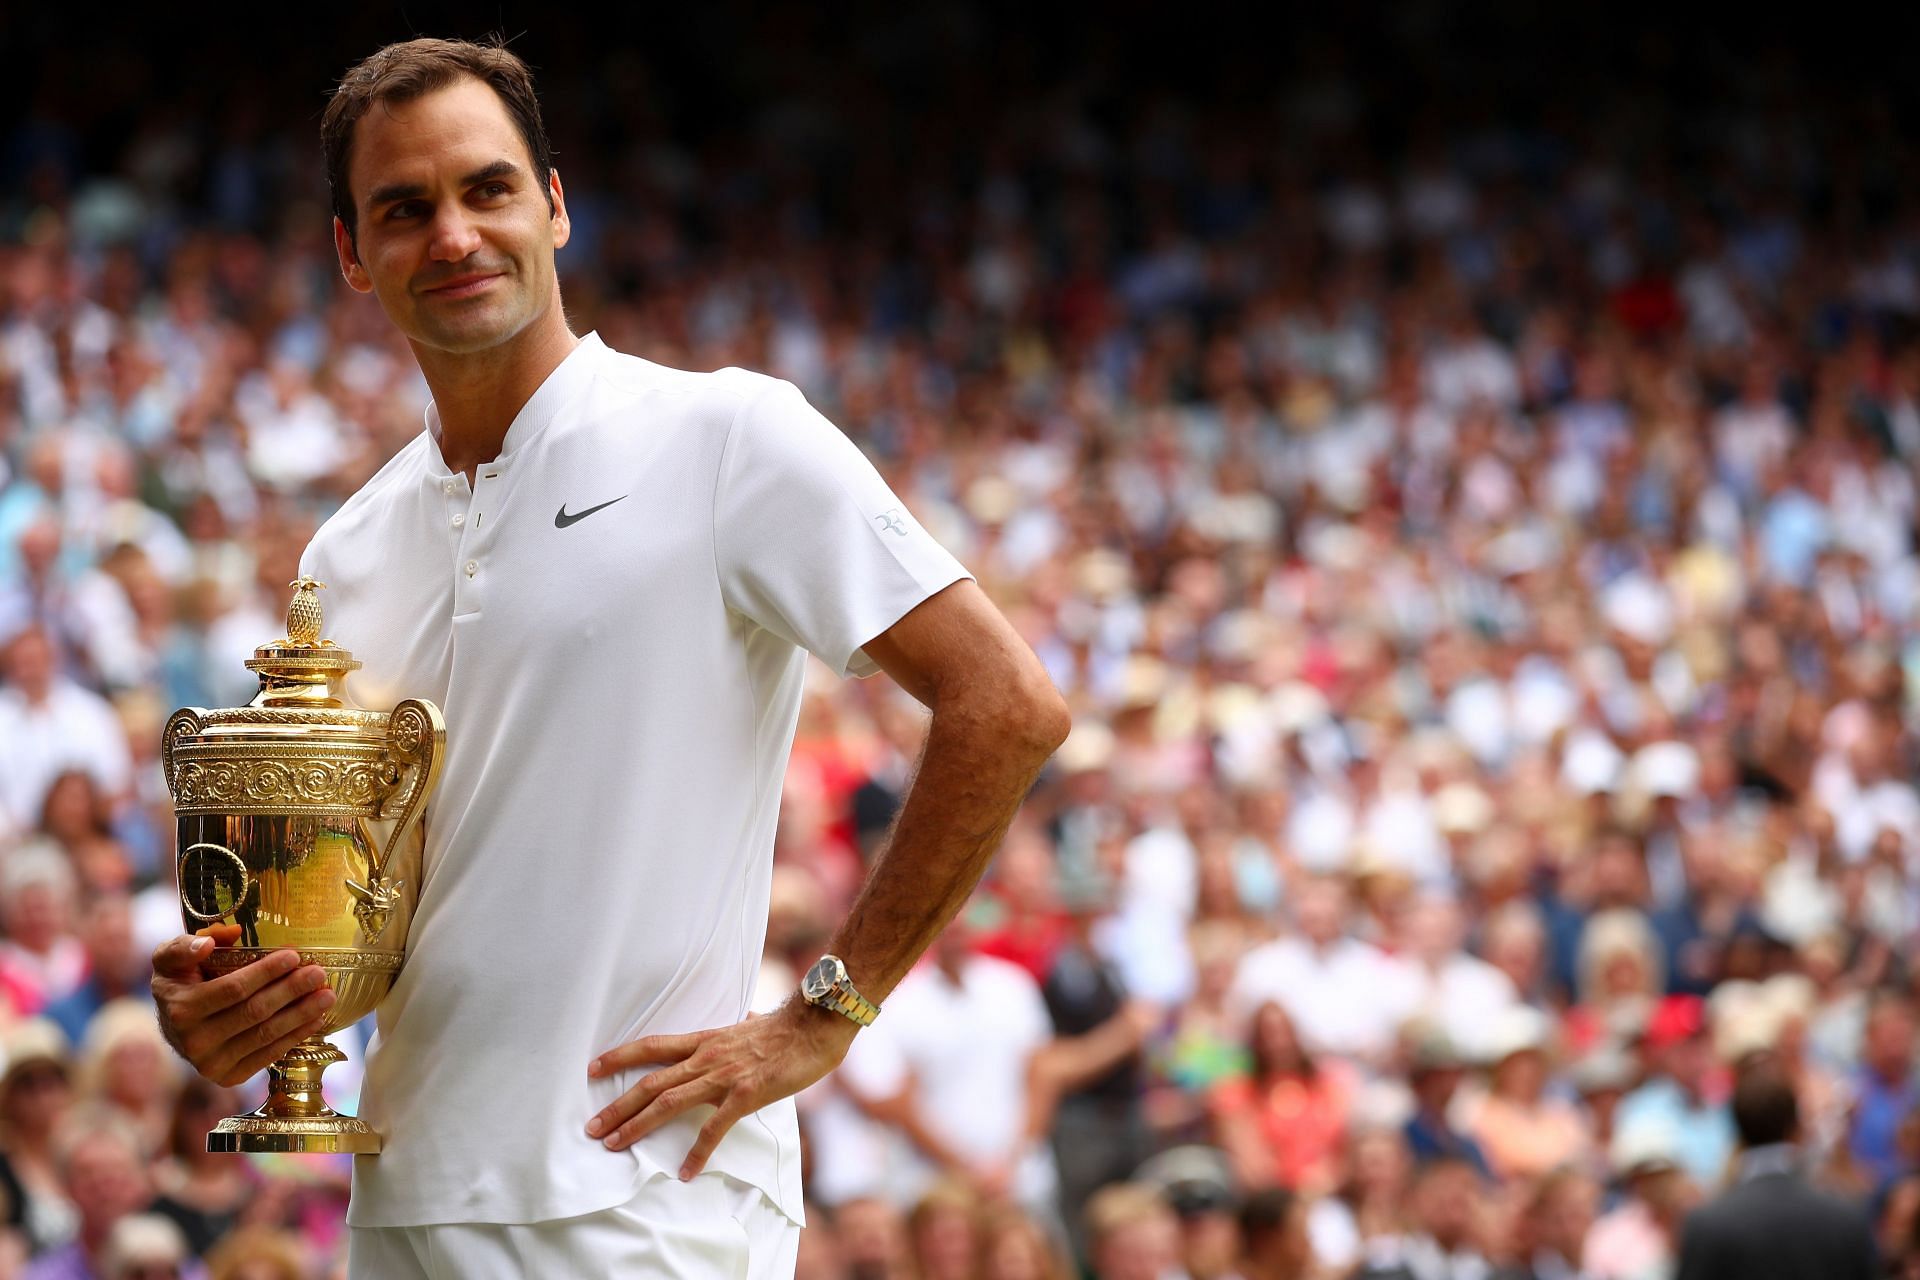 Roger Federer won the Wimbledon title in 2017